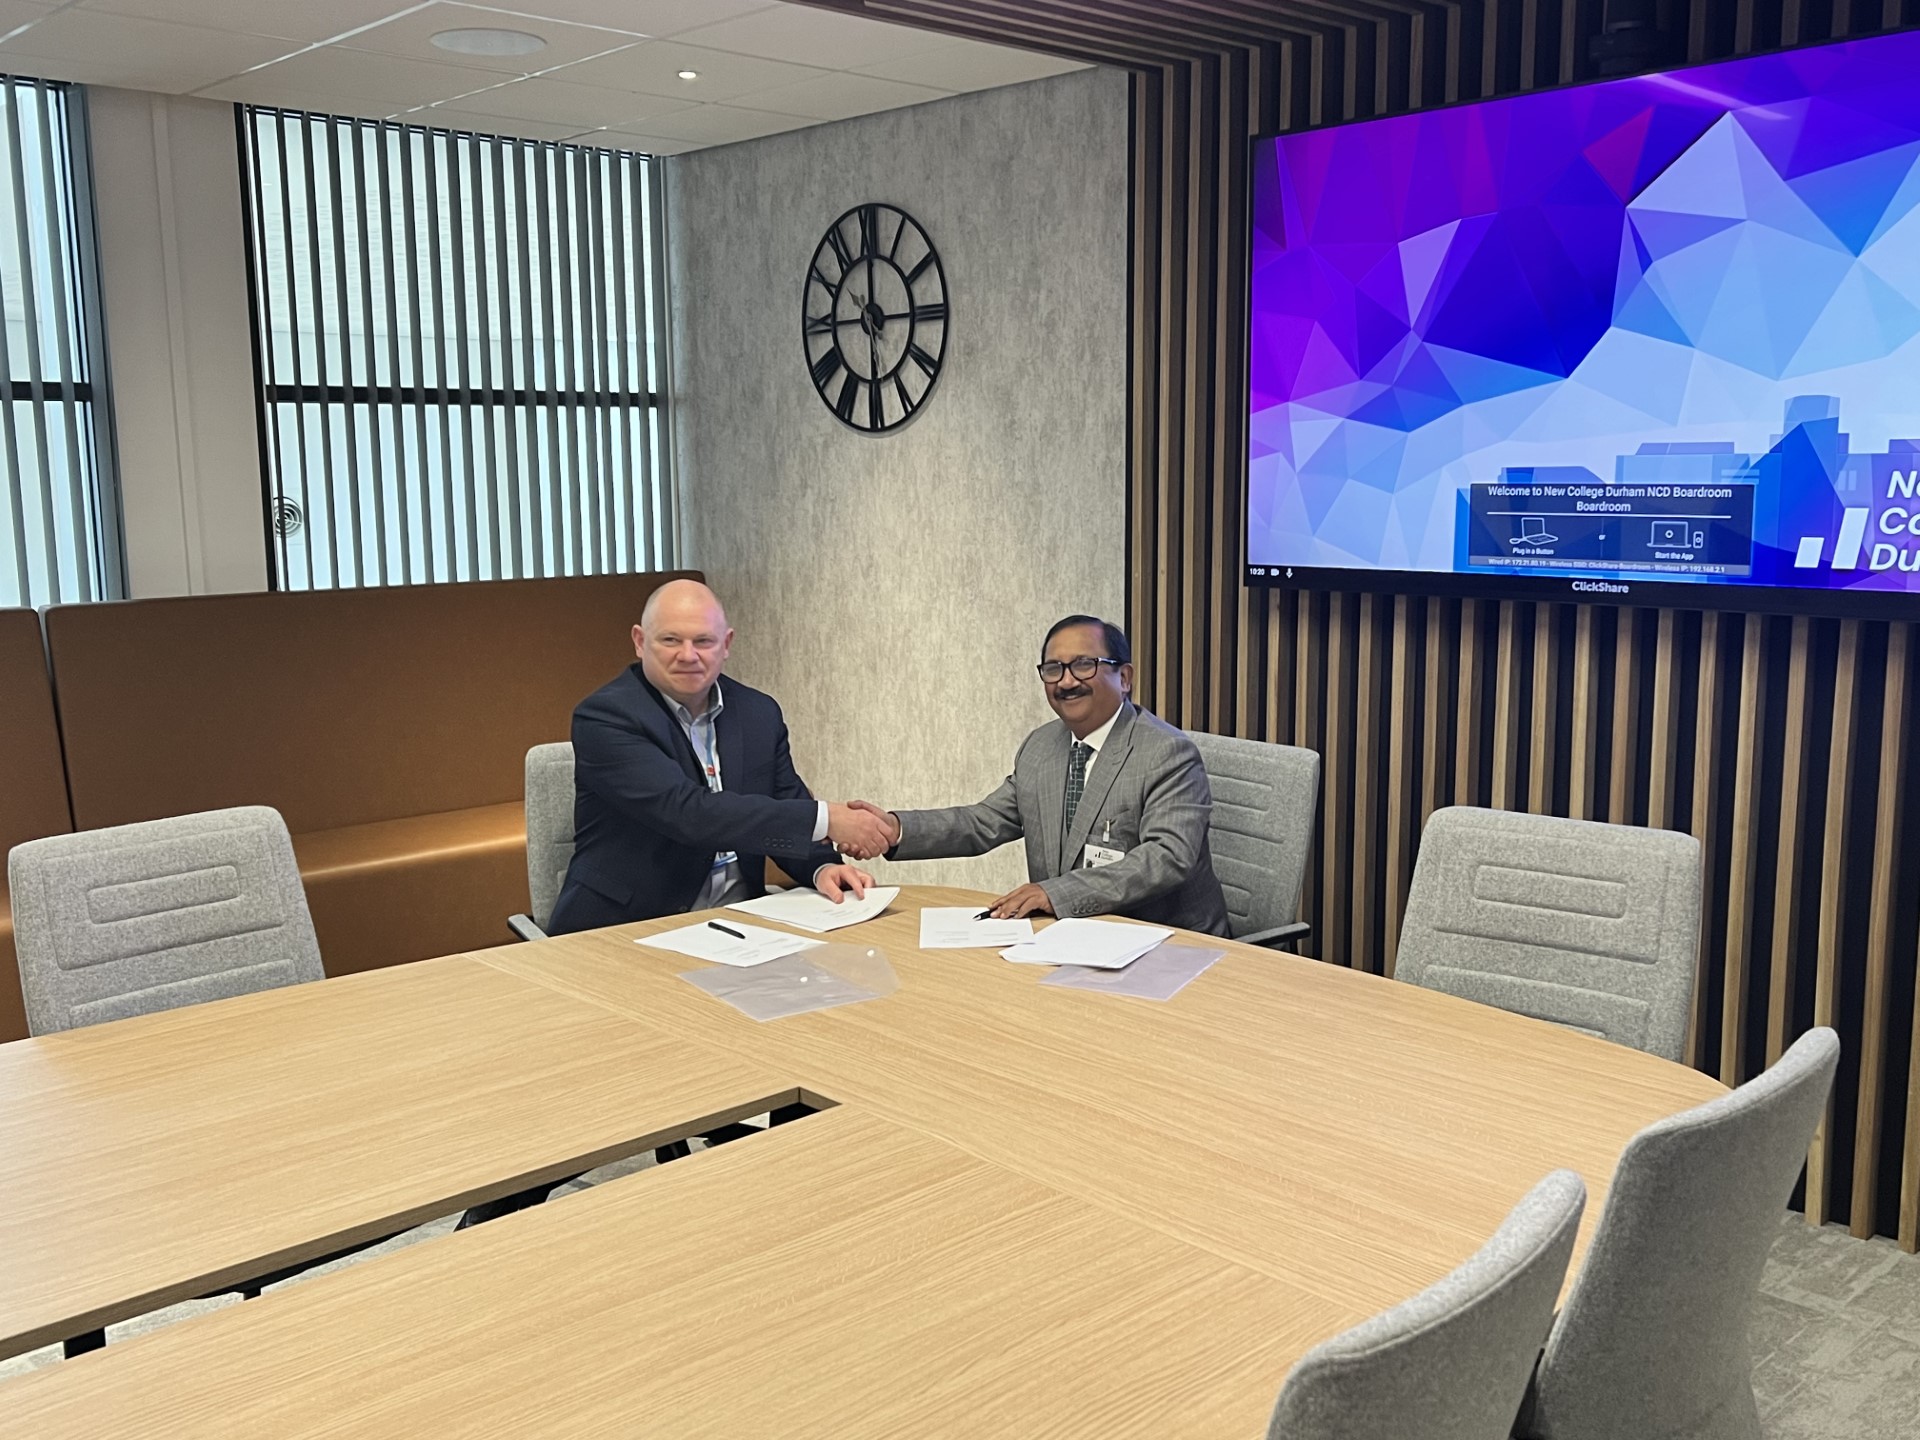 Andy Broadbent, Principal and CEO of New College Durham, and Dr Padmesh Gupta, Managing Director of Oxford Business College, seal the new partnership